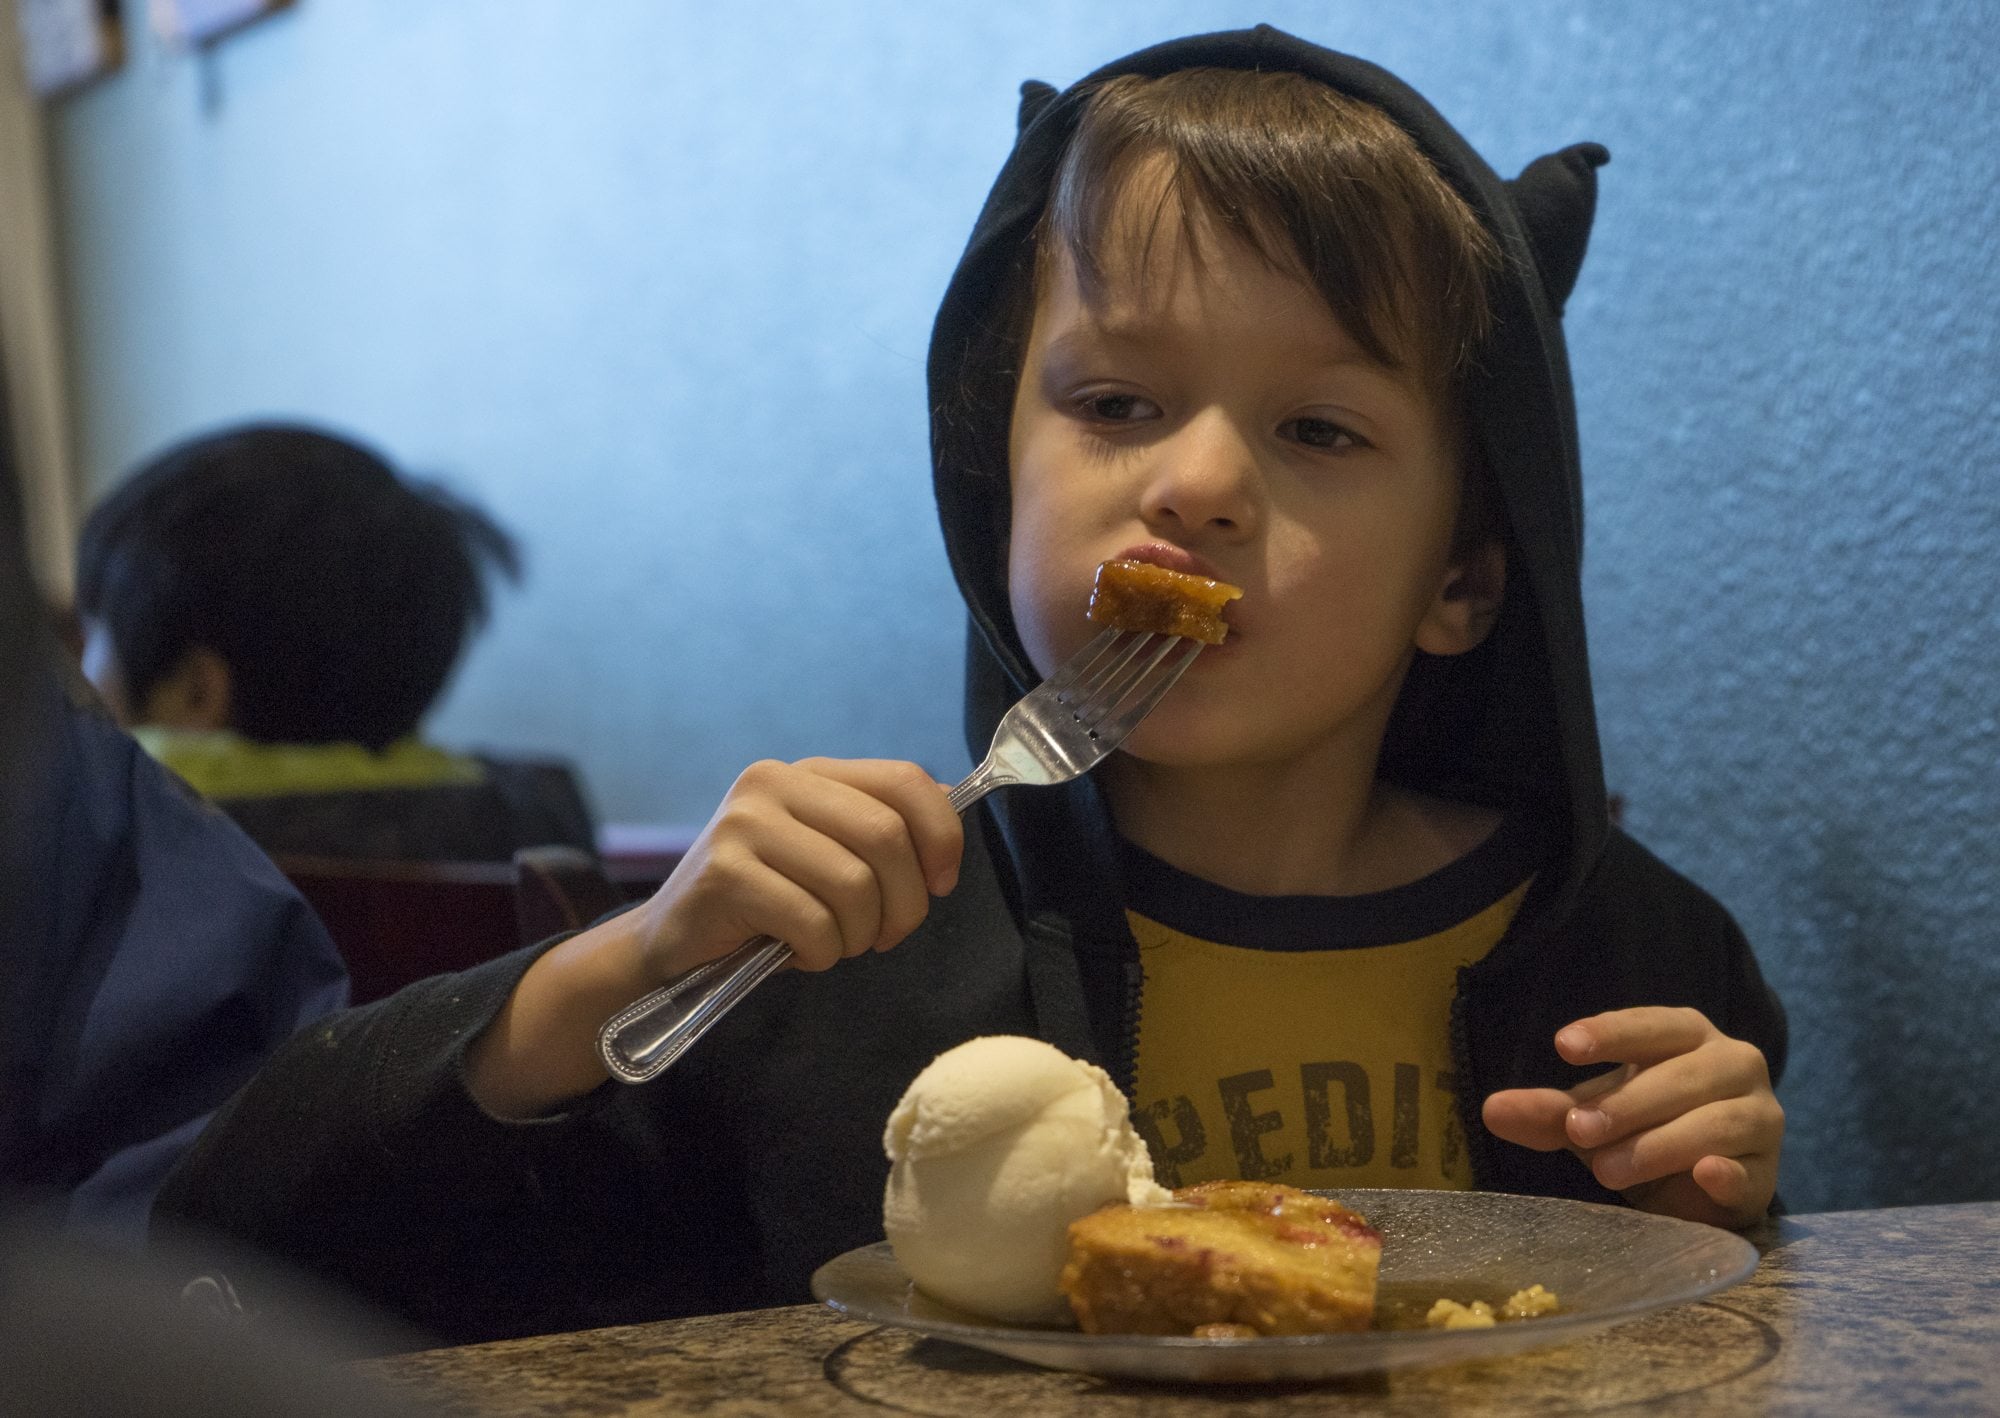 Thomas Gallegos, 6, of Vancouver eats a piece of baked French toast at Ice Cream Renaissance on Saturday for Eat Ice Cream for Breakfast Day. Thomas visited the store with his parents, Mike and Sarah Gallegos, and two brothers, Patrick and Anthony.